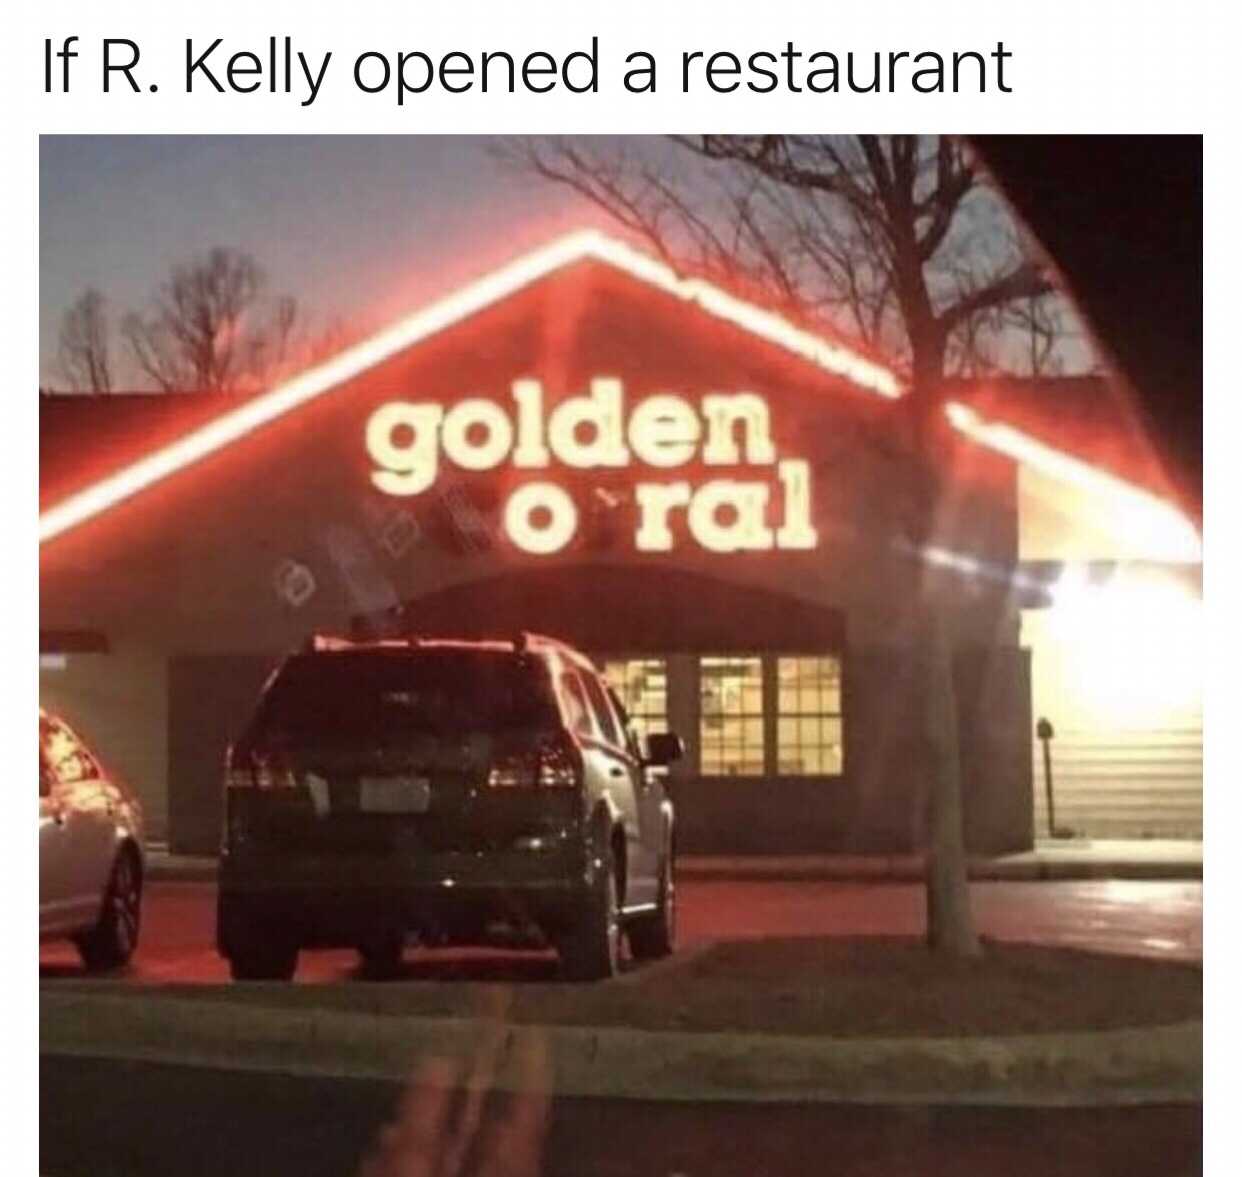 memes - golden corral - If R. Kelly opened a restaurant golden oral